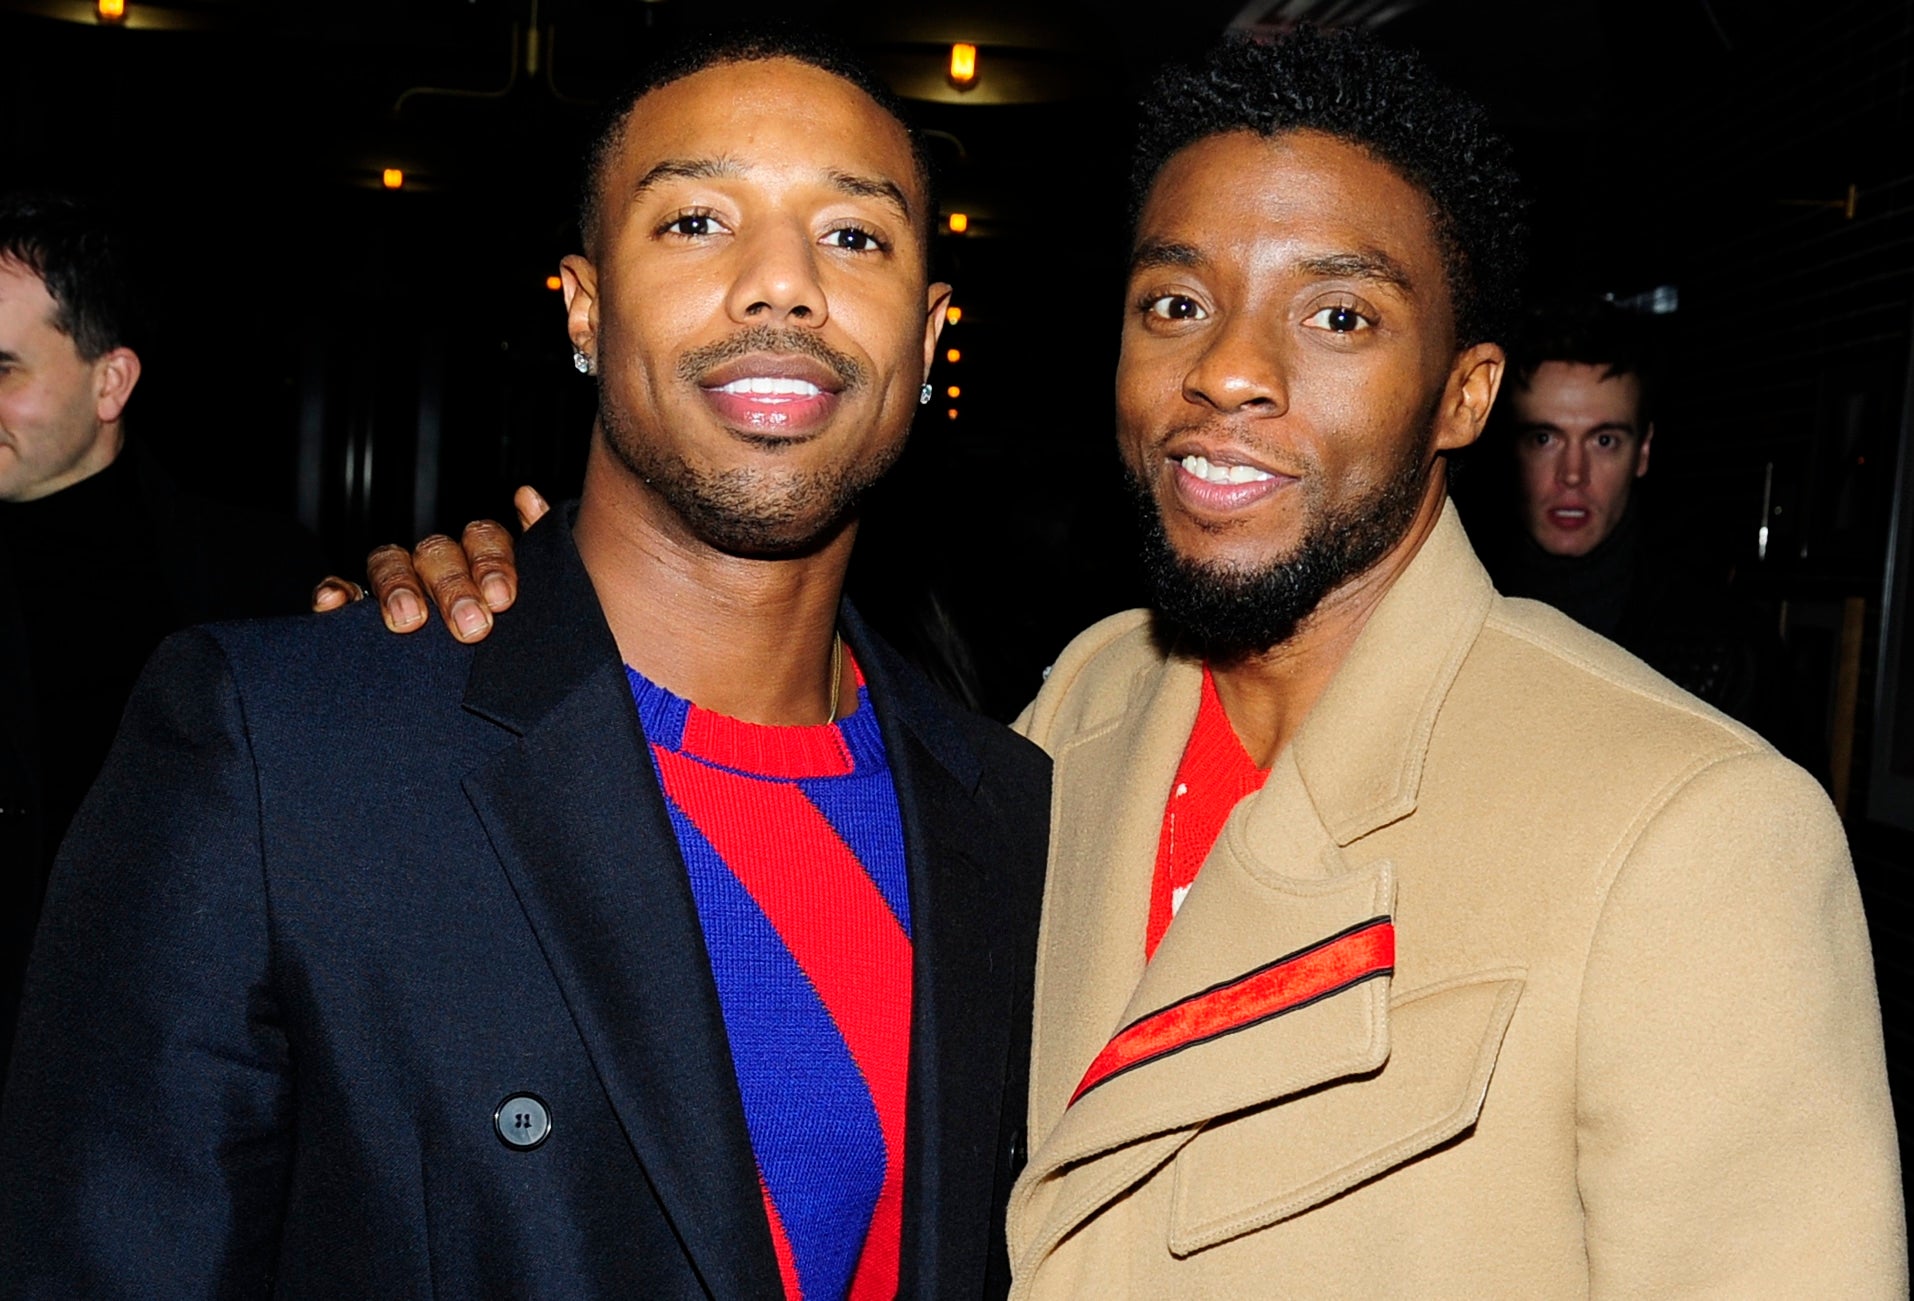 No, We Don't All Look Alike But Chadwick Boseman And Michael B. Jordan Once Played The Same Role